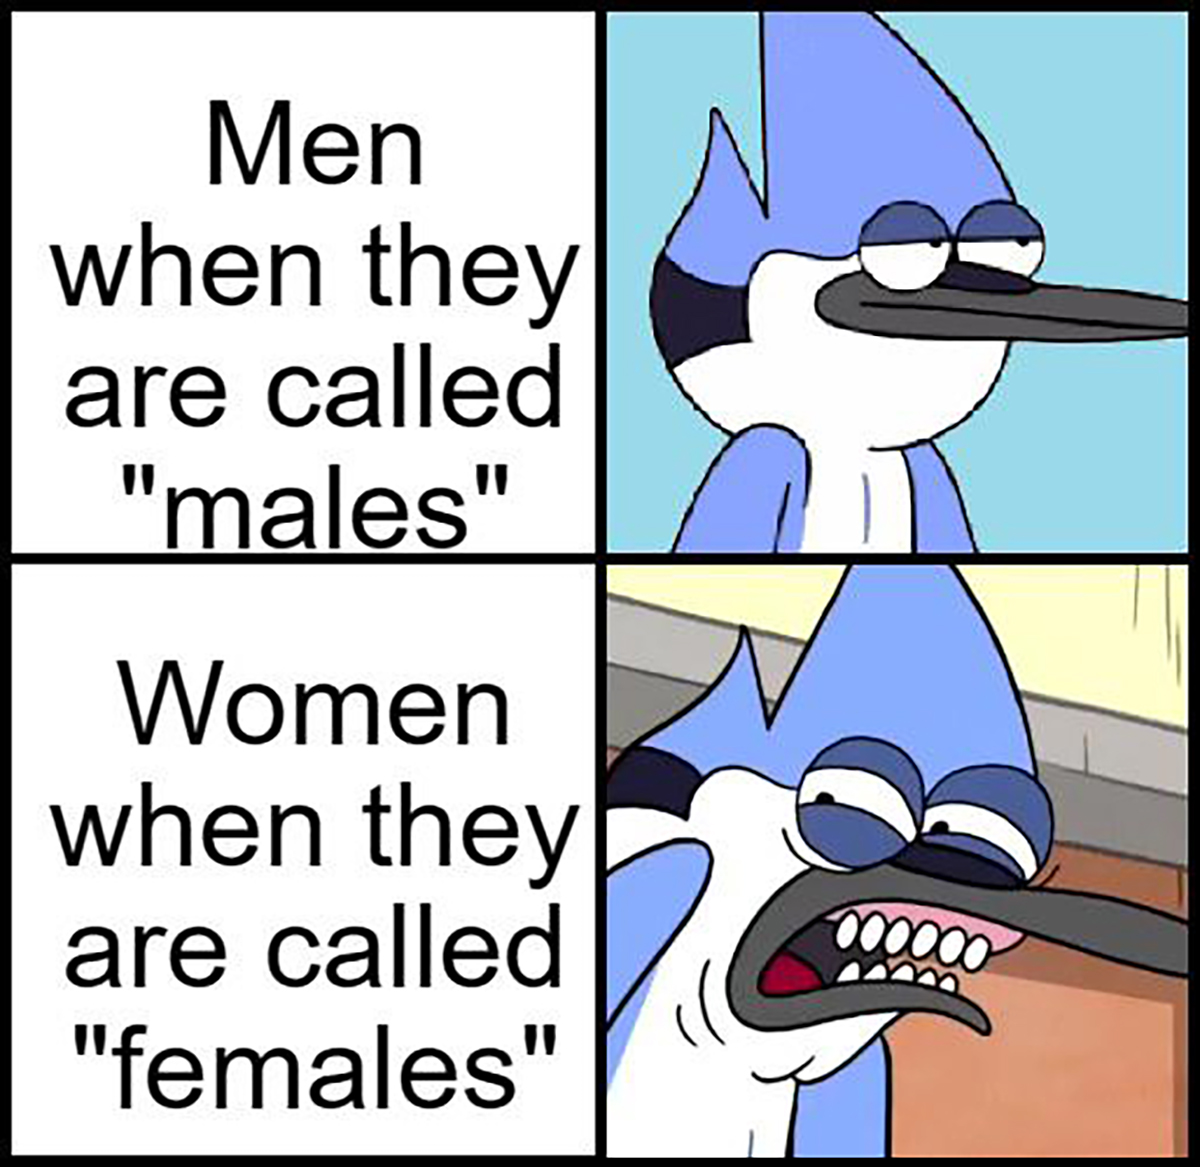 cartoon - Men when they are called "males" Women when they are called "females"